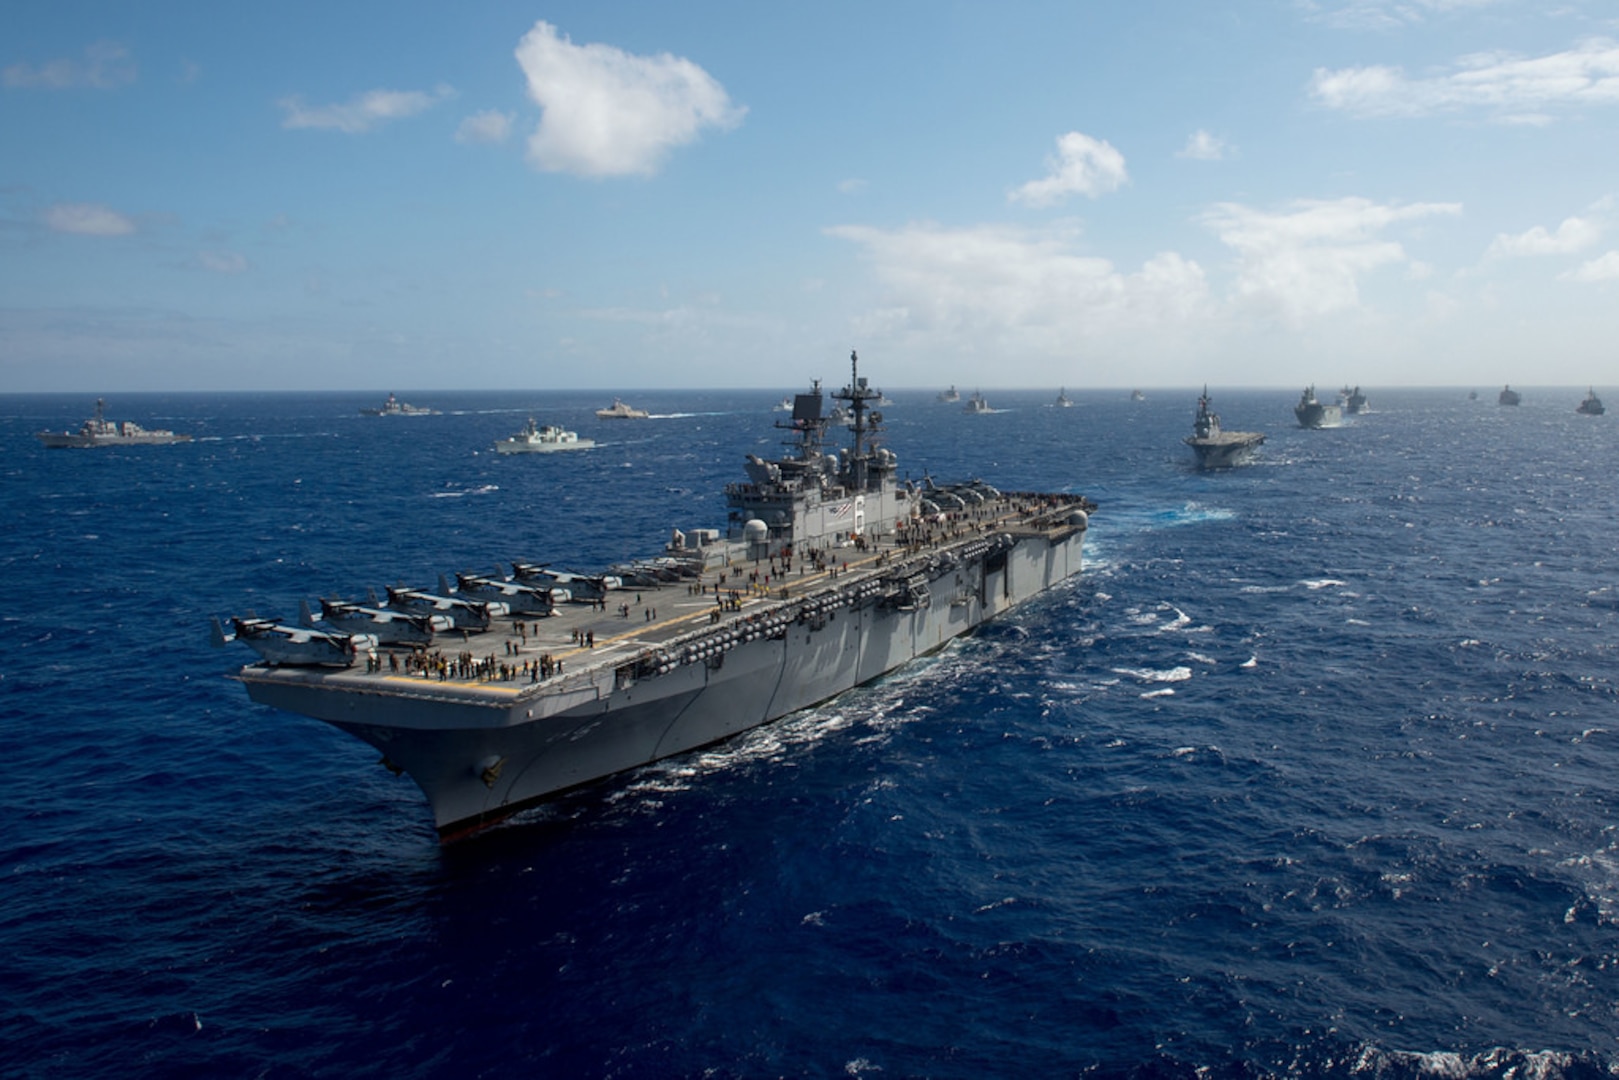 The amphibious assault ship USS America (LHA 6), one of 40 ships and submarines representing 12 international partner nations, steams along during a group sail as part of exercise Rim of the Pacific 2016. Twenty-six nations, more than 40 ships and submarines, more than 200 aircraft, and 25,000 personnel are participating in RIMPAC from June 30 to Aug. 4, in and around the Hawaiian Islands and Southern California. The world's largest international maritime exercise, RIMPAC provides a unique training opportunity that helps participants foster and sustain the cooperative relationships that are critical to ensuring the safety of sea lanes and security on the world's oceans. RIMPAC 2016 is the 25th exercise in the series that began in 1971. 